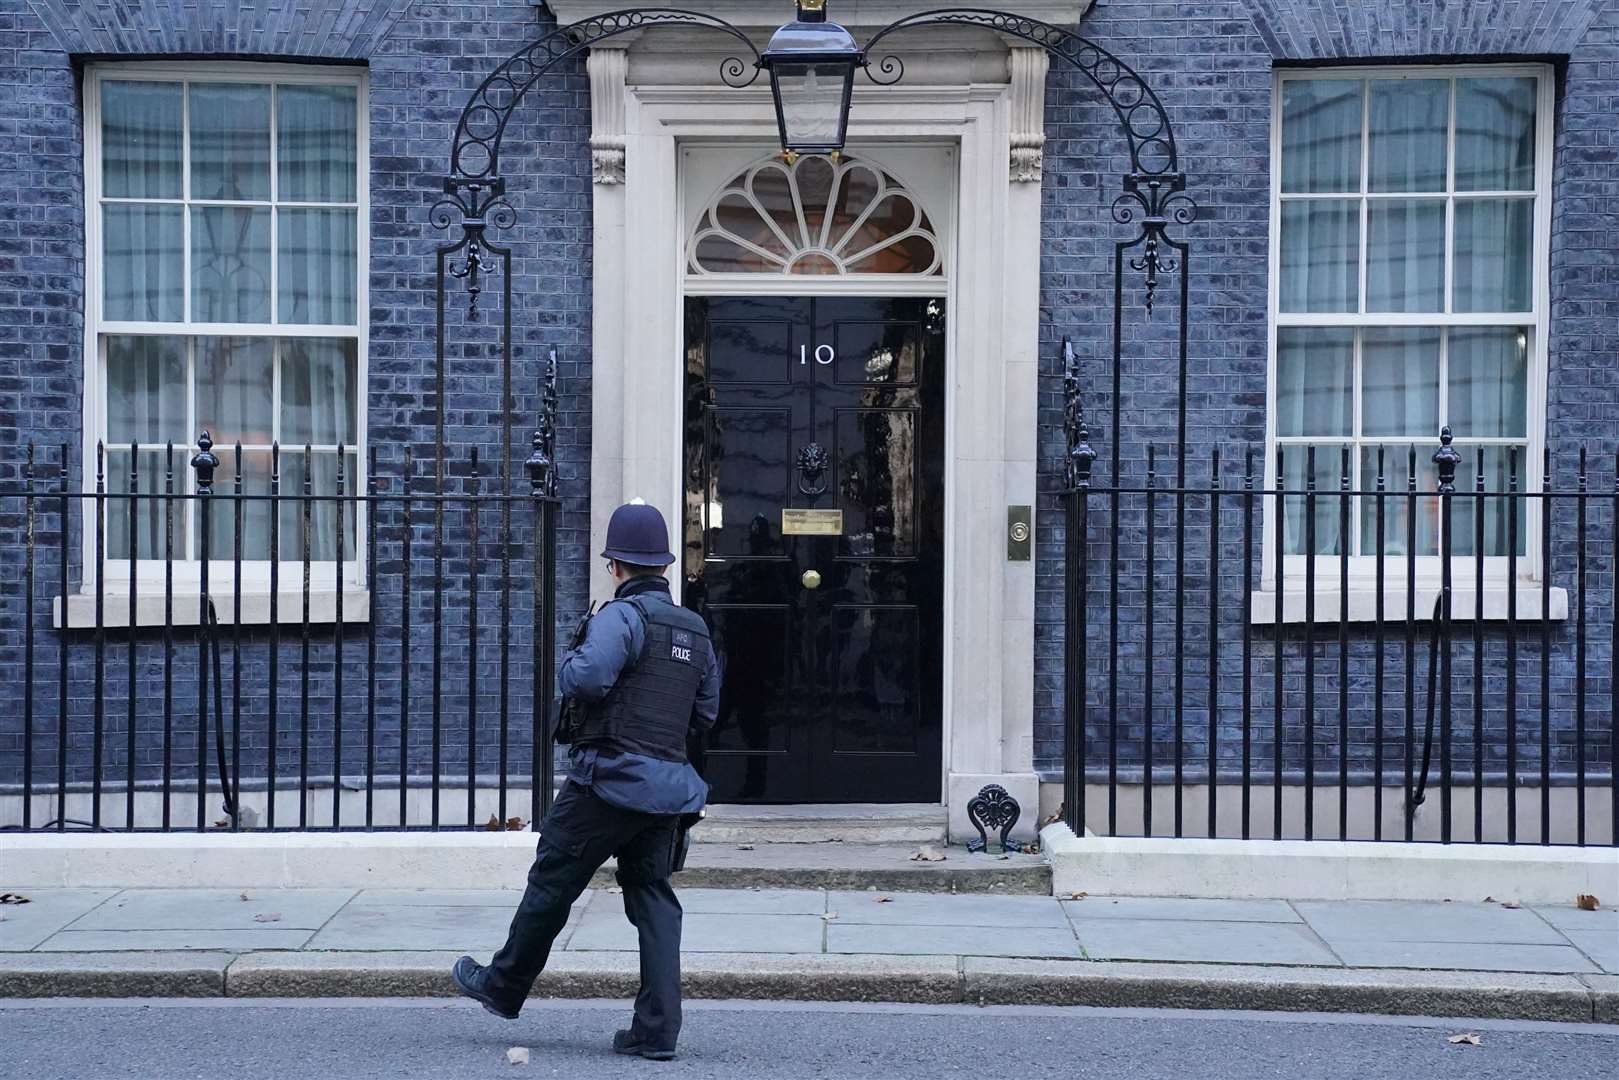 Police have issued further fines as part of their probe into claims of lockdown-busting parties at No 10 (Jonathan Brady/PA)